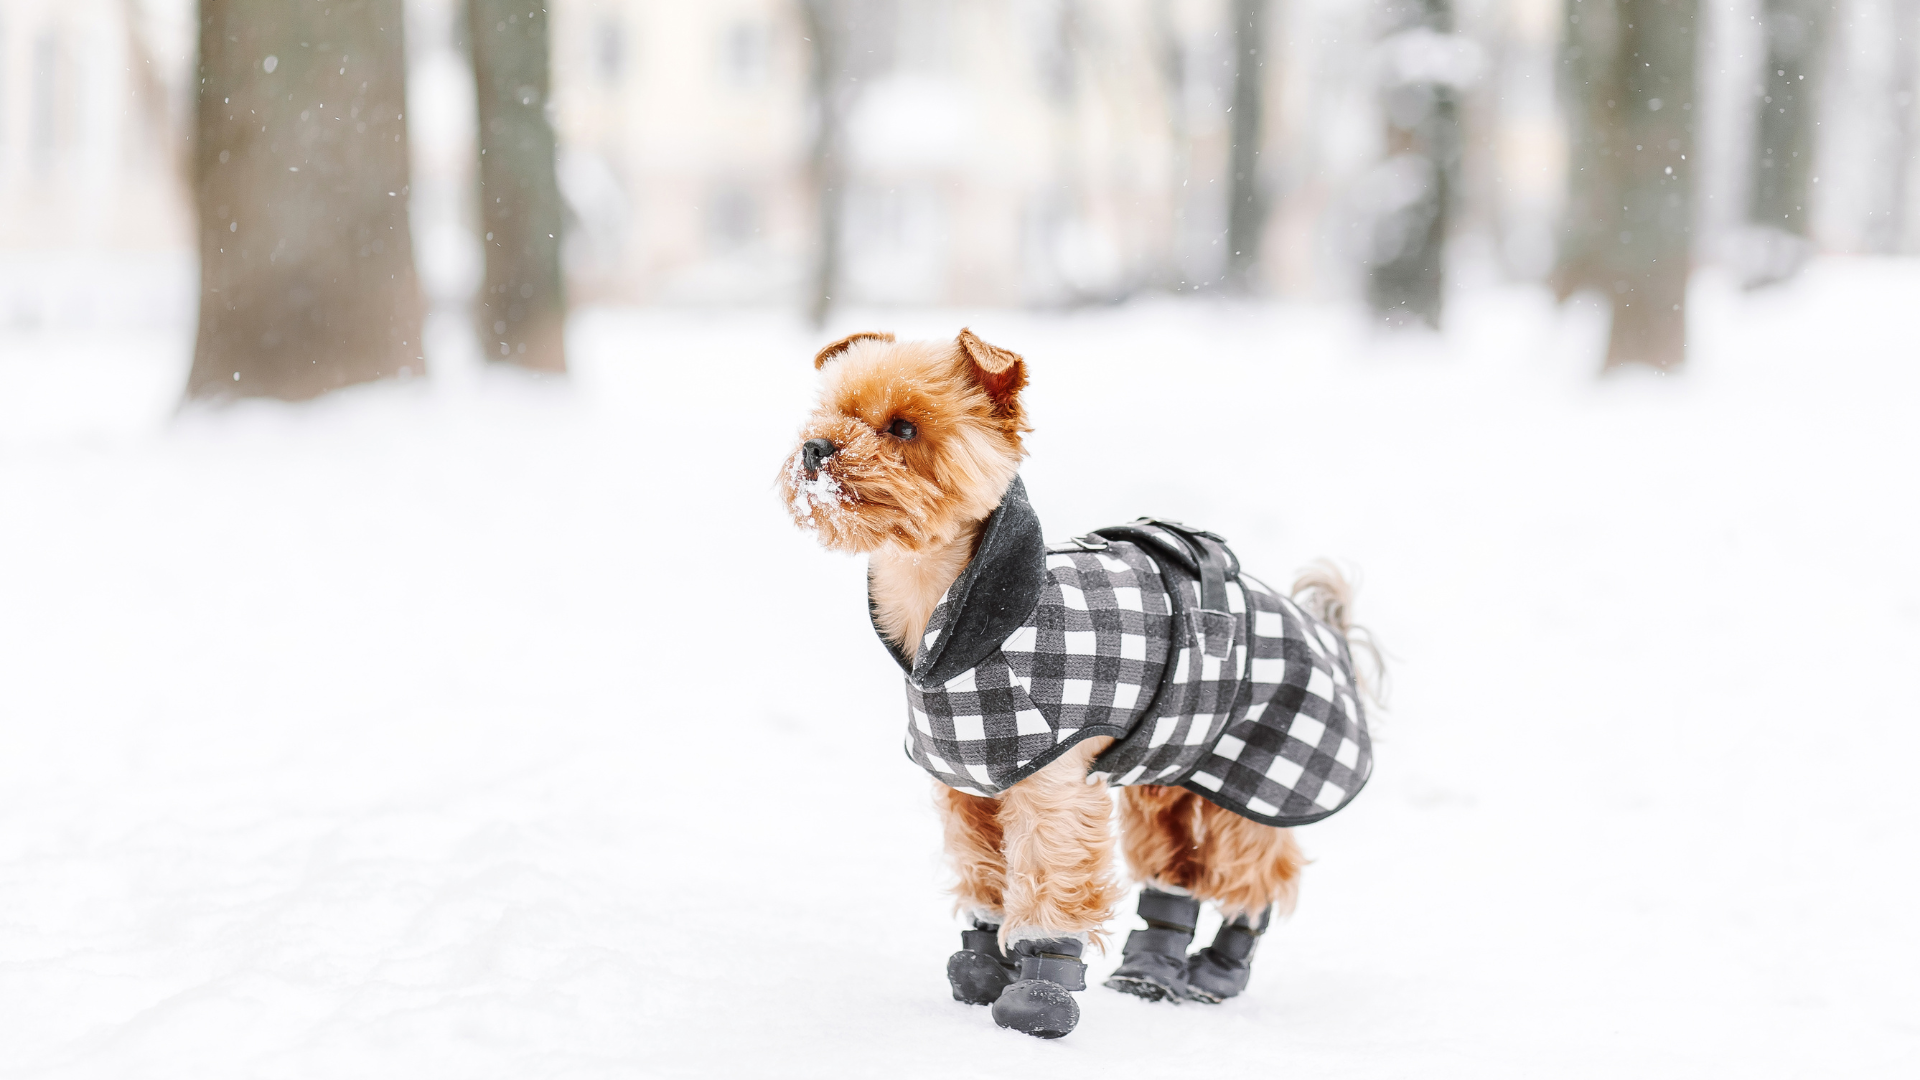 a small dog wearing shoes and a jacket is pictured in the snow...